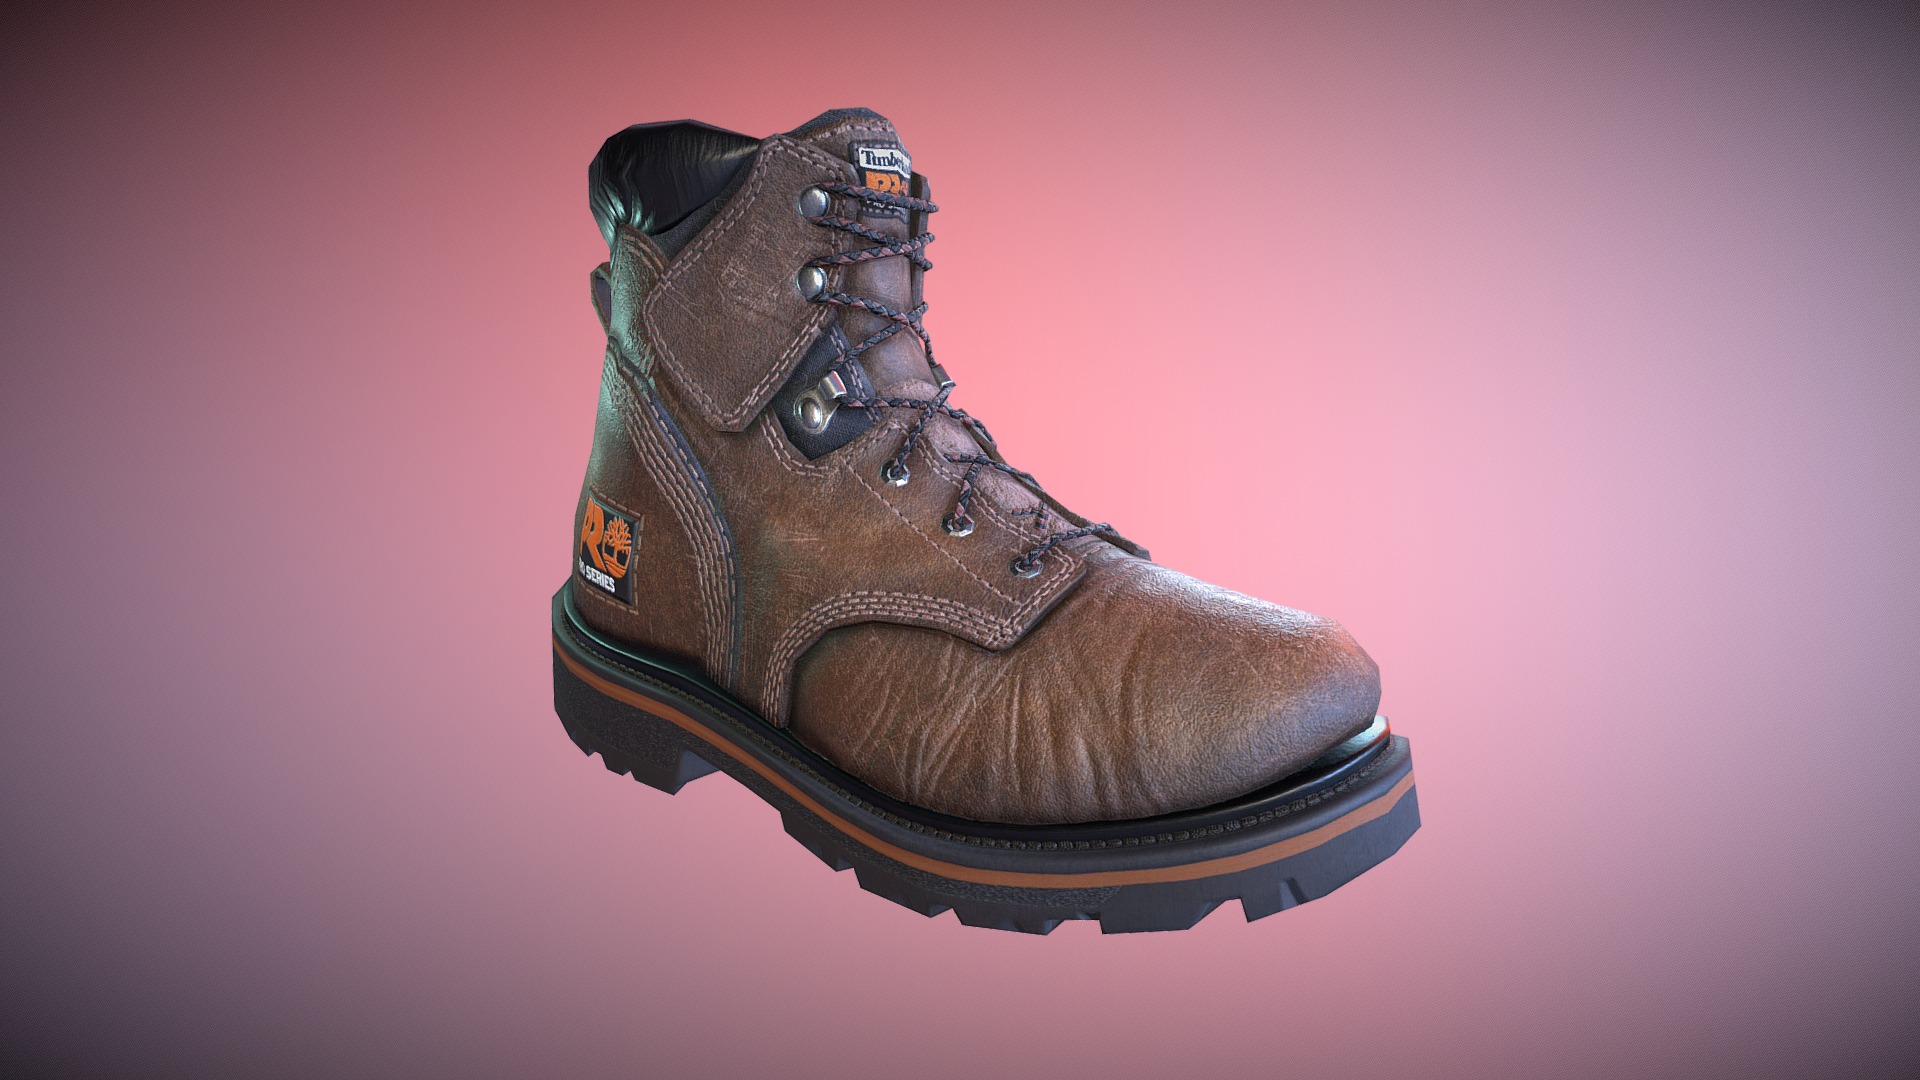 3D model Timberland Boots Pro Series - This is a 3D model of the Timberland Boots Pro Series. The 3D model is about a brown boot on a pink background.